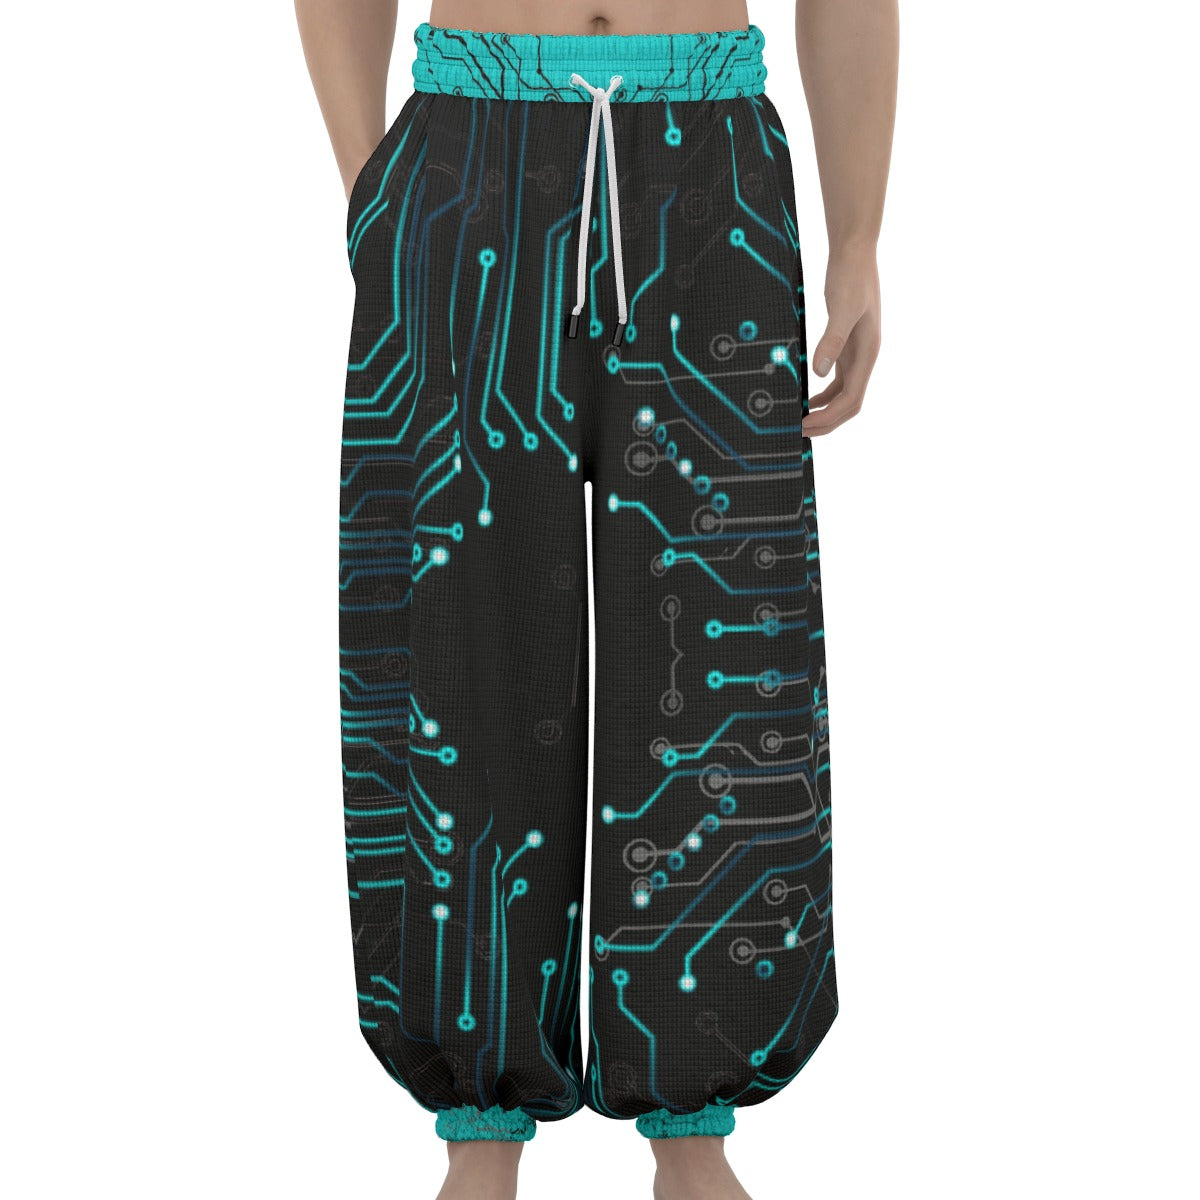 Stand out  with the  Glitched Unisex Lantern Pants  available at Hey Nugget. Grab yours today!